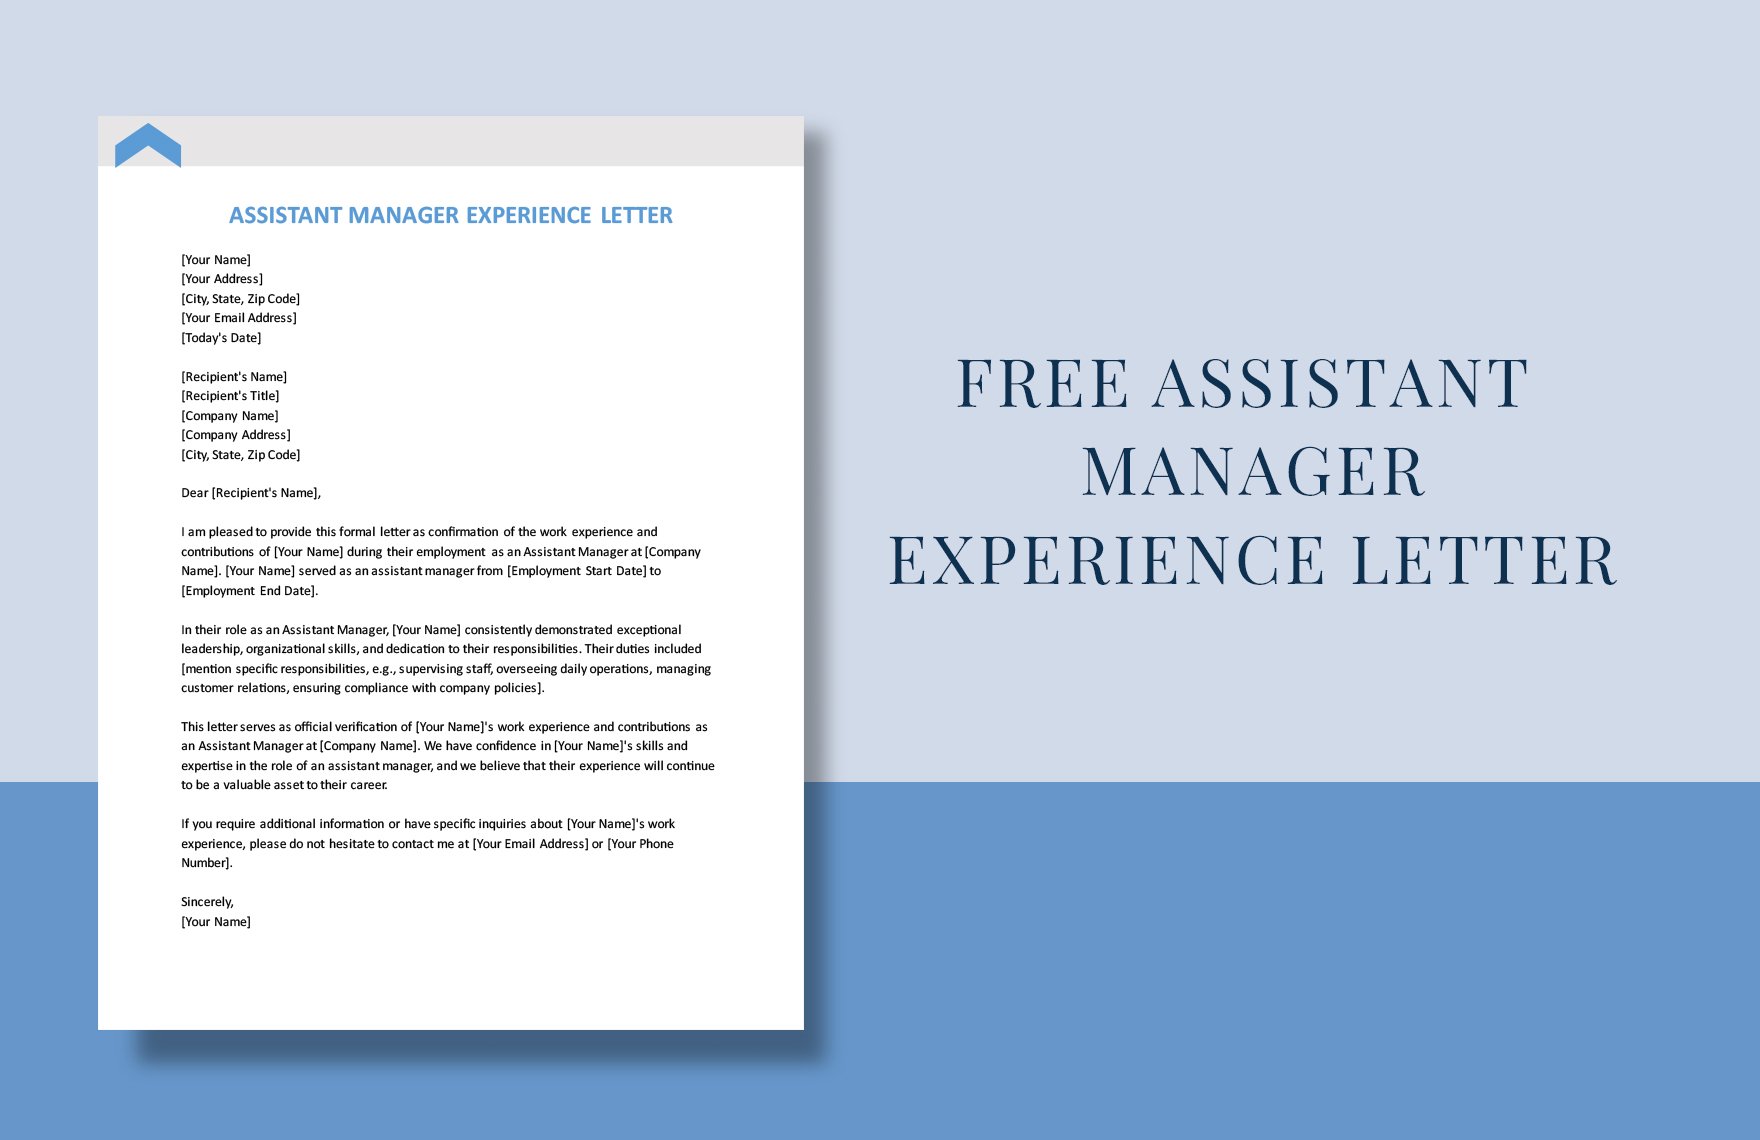 Assistant Manager Experience Letter